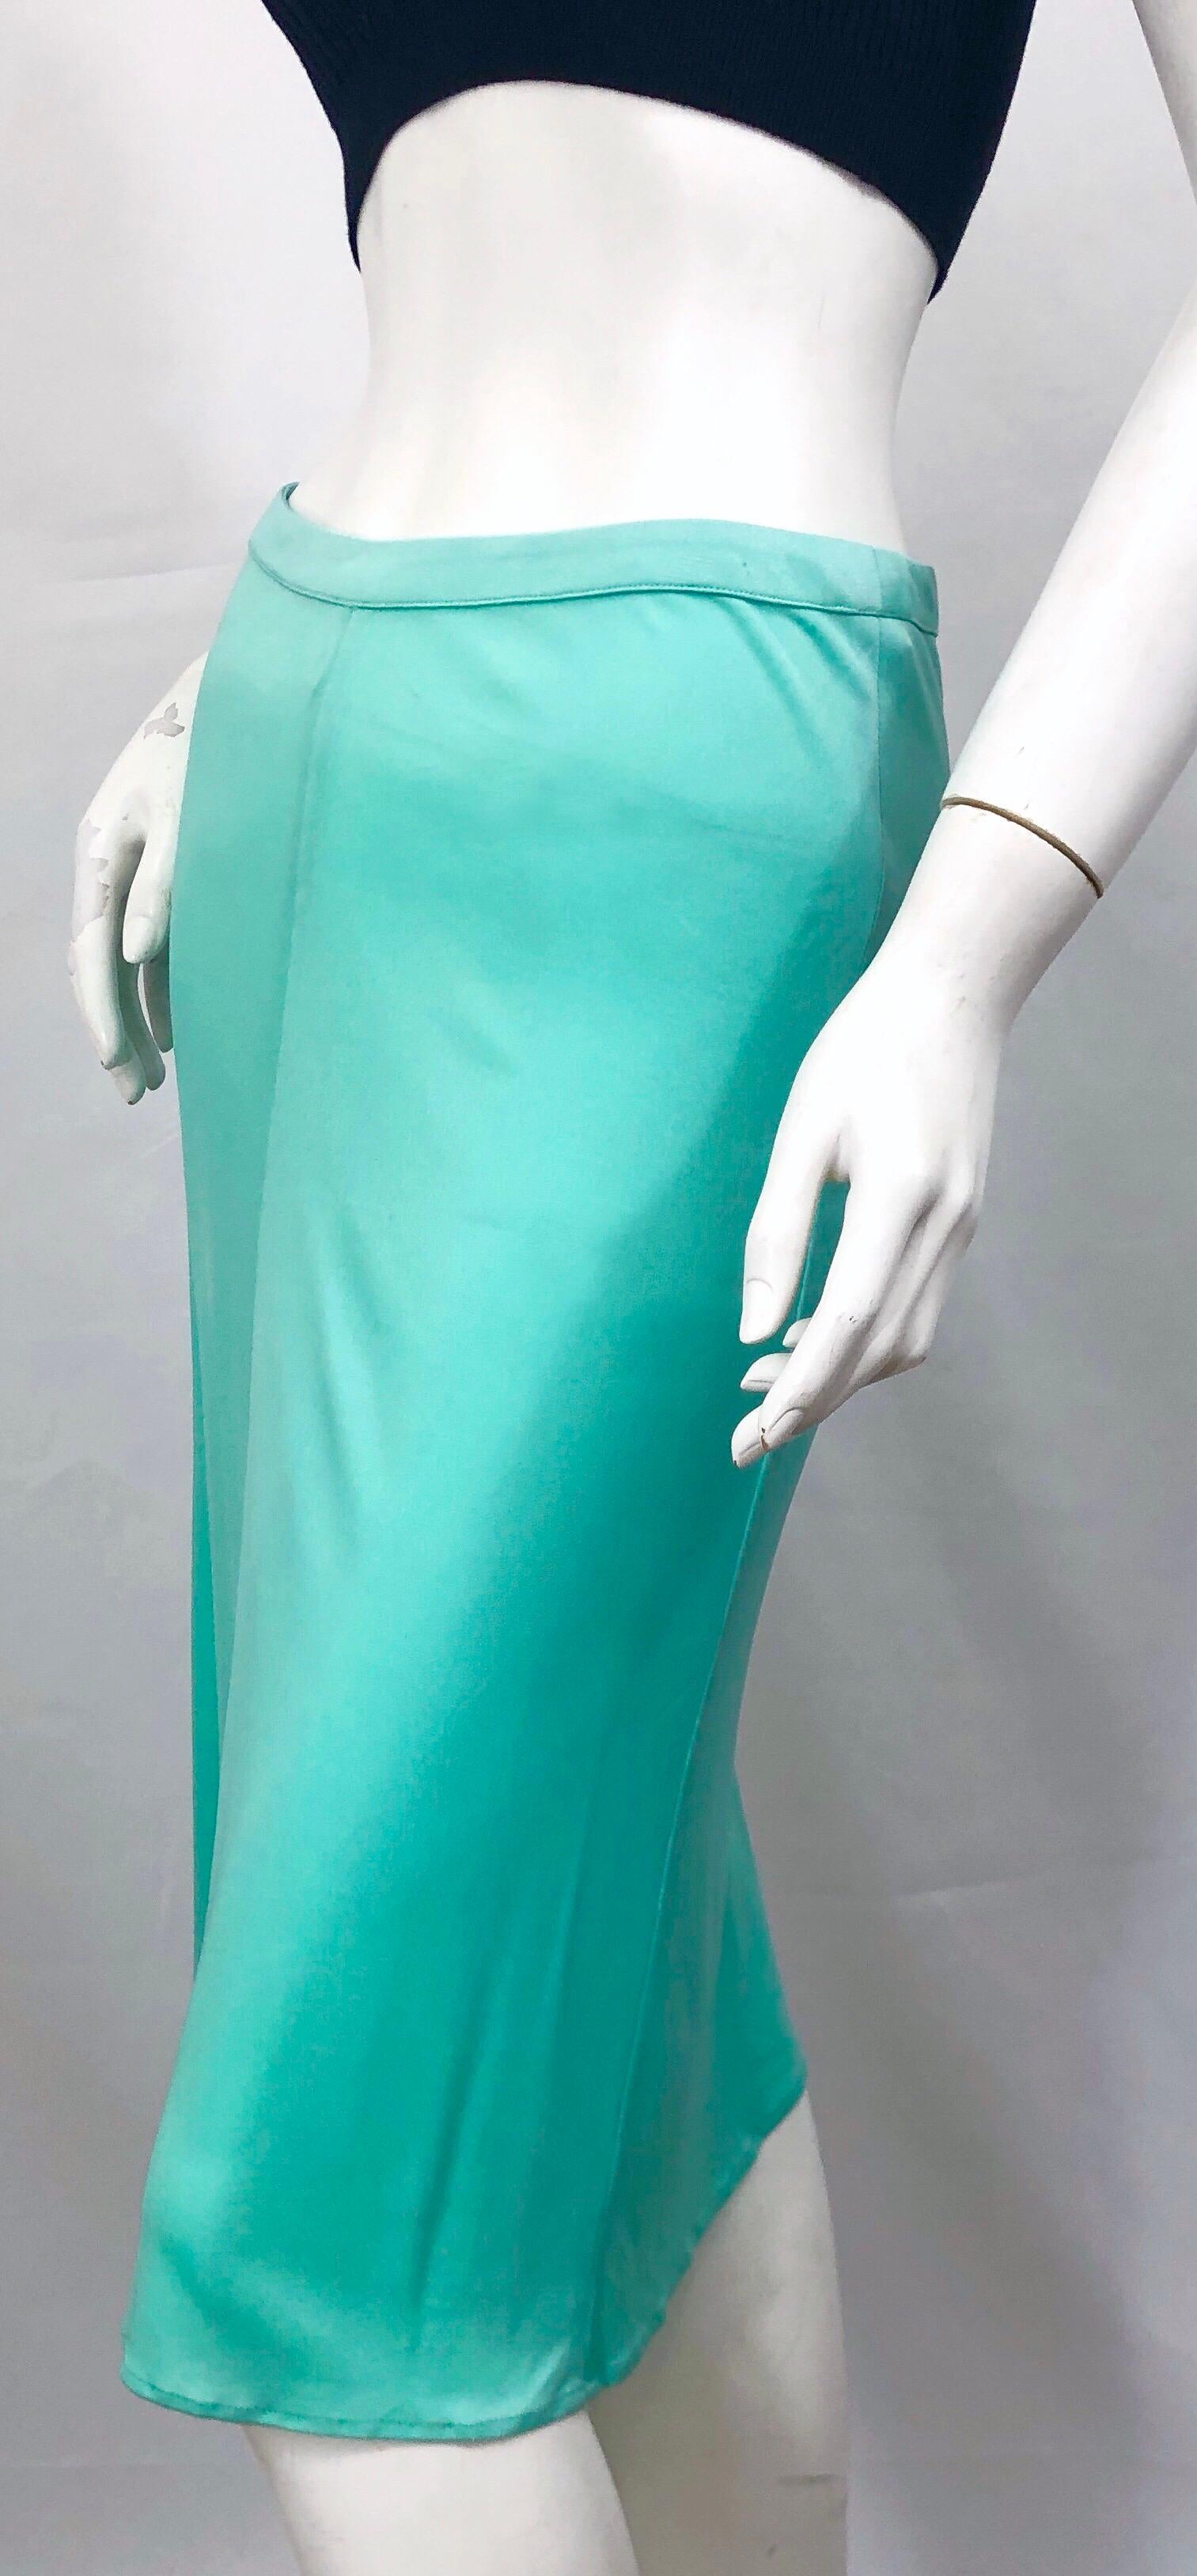 1990s Gianni Versace Couture Teal Turquoise Blue Silk Jersey Vintage 90s Skirt For Sale 2